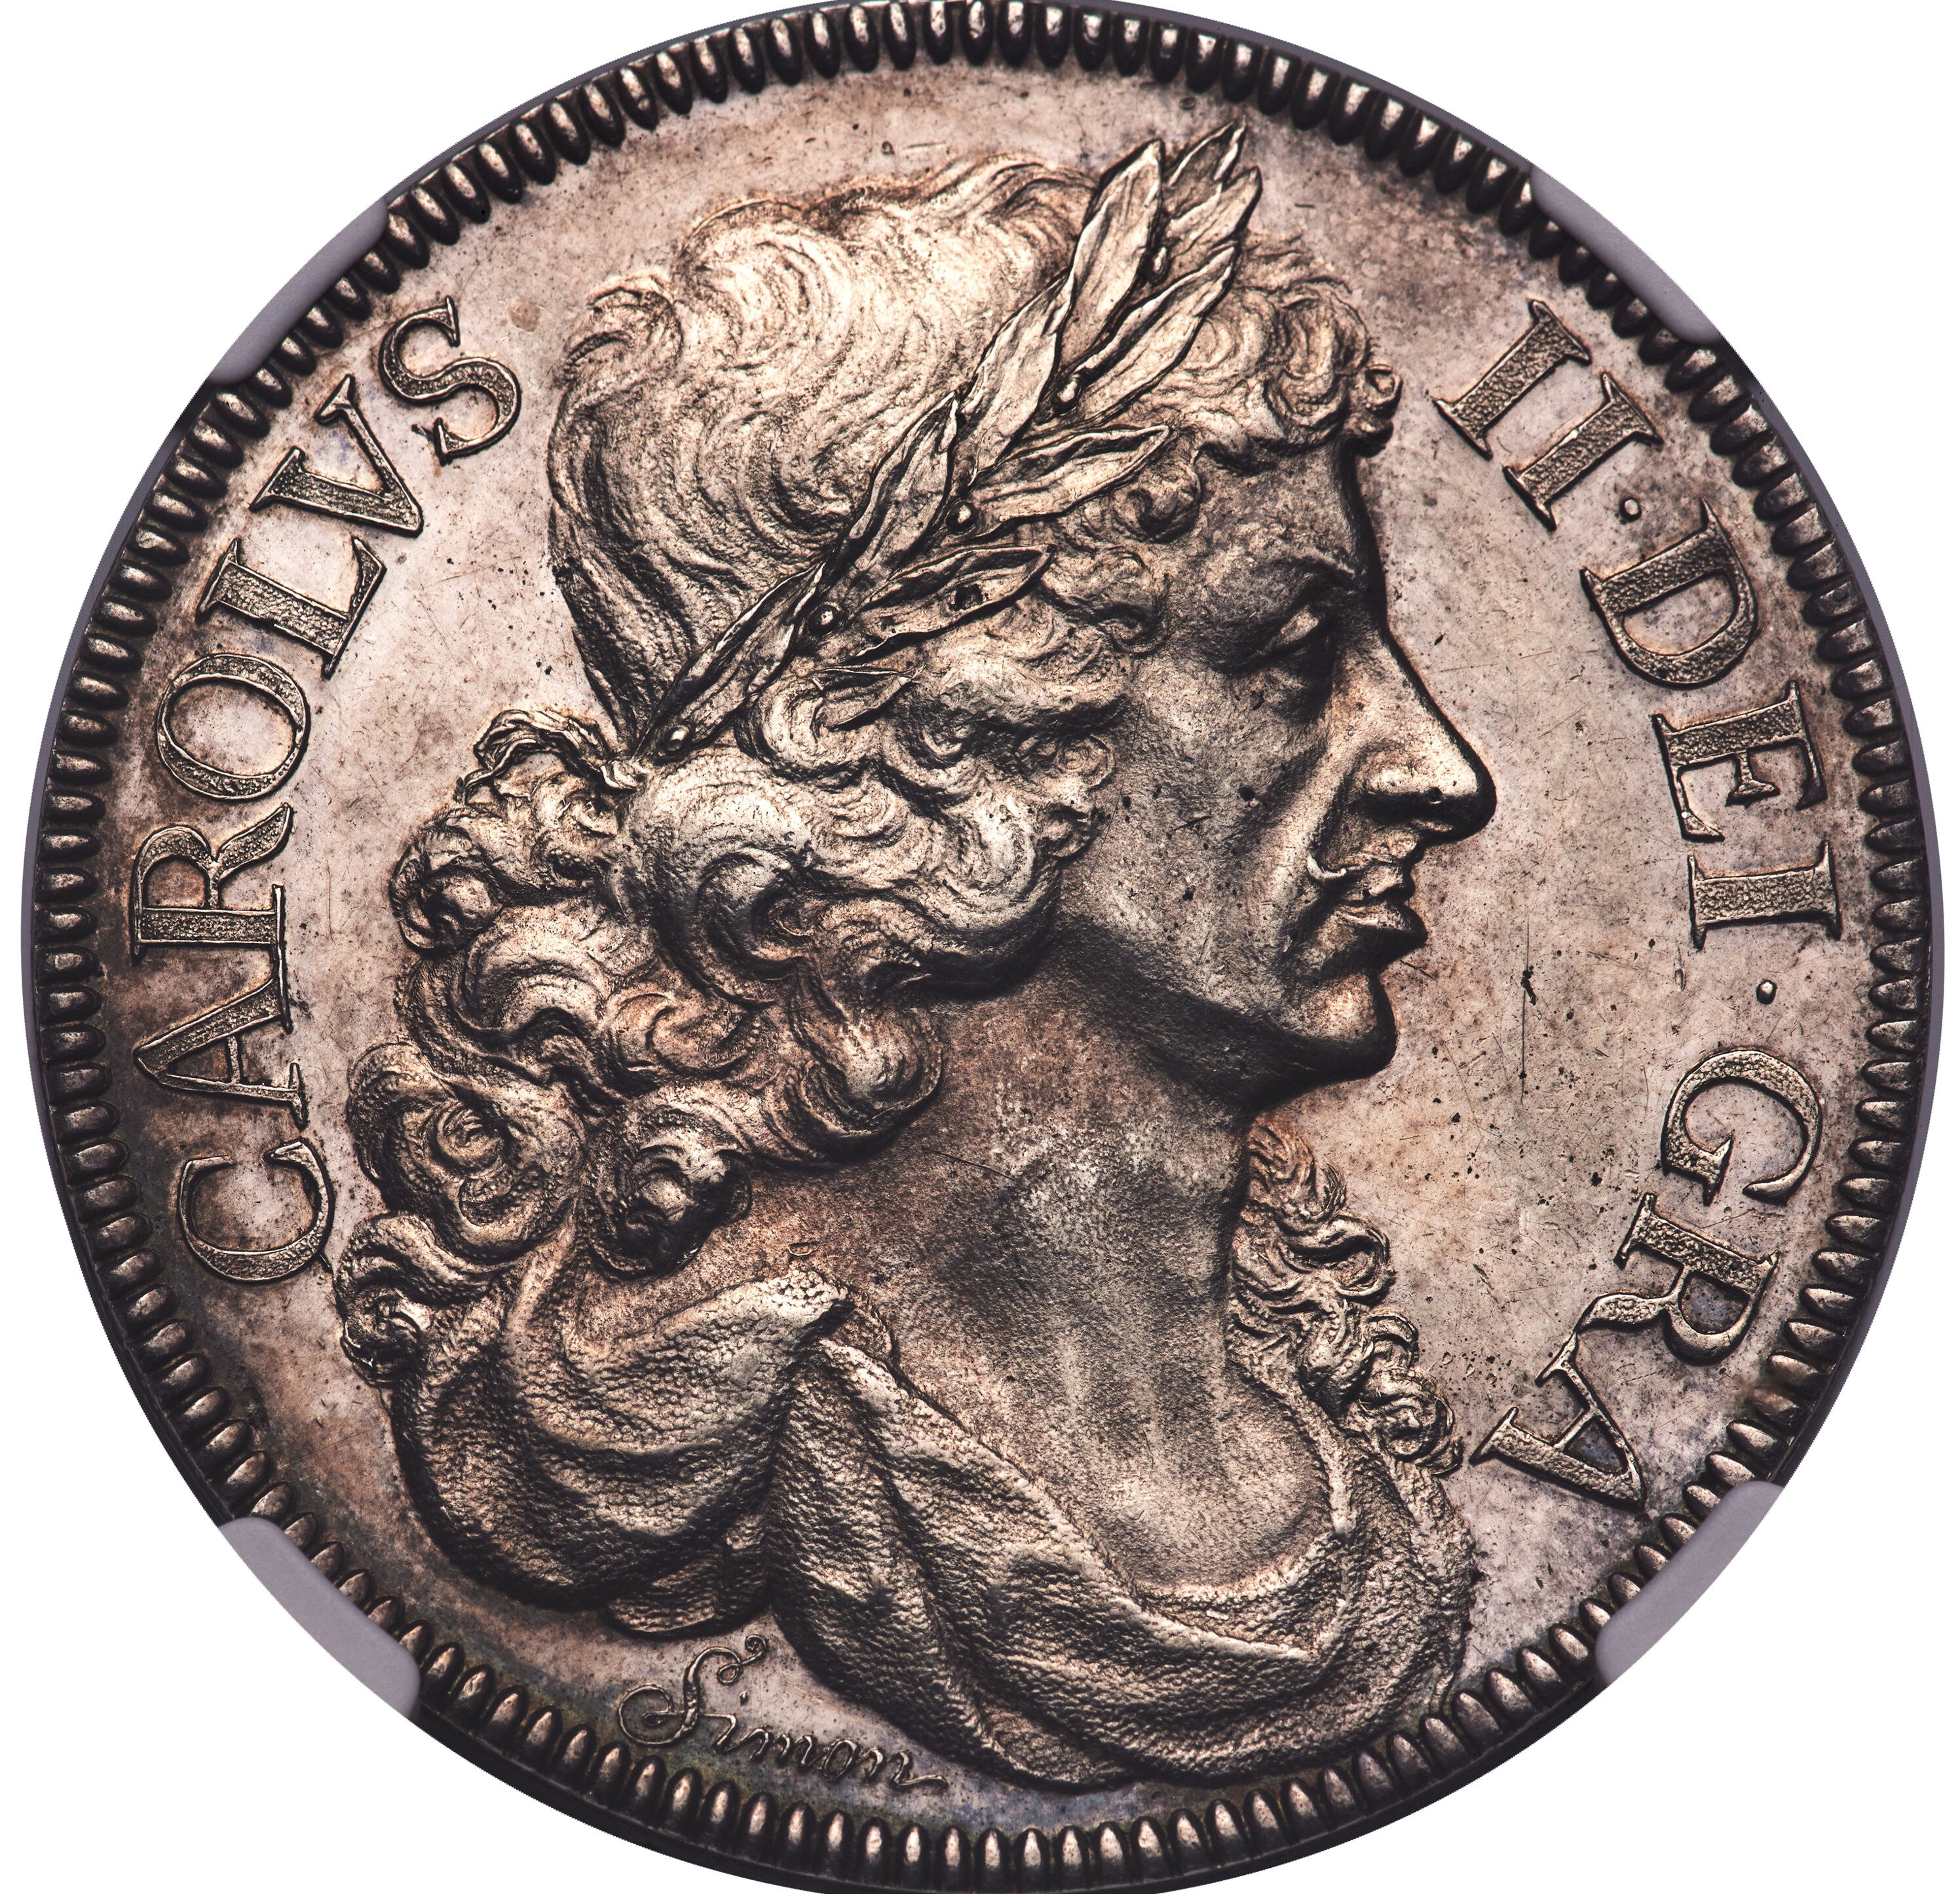 Charles II petition coin